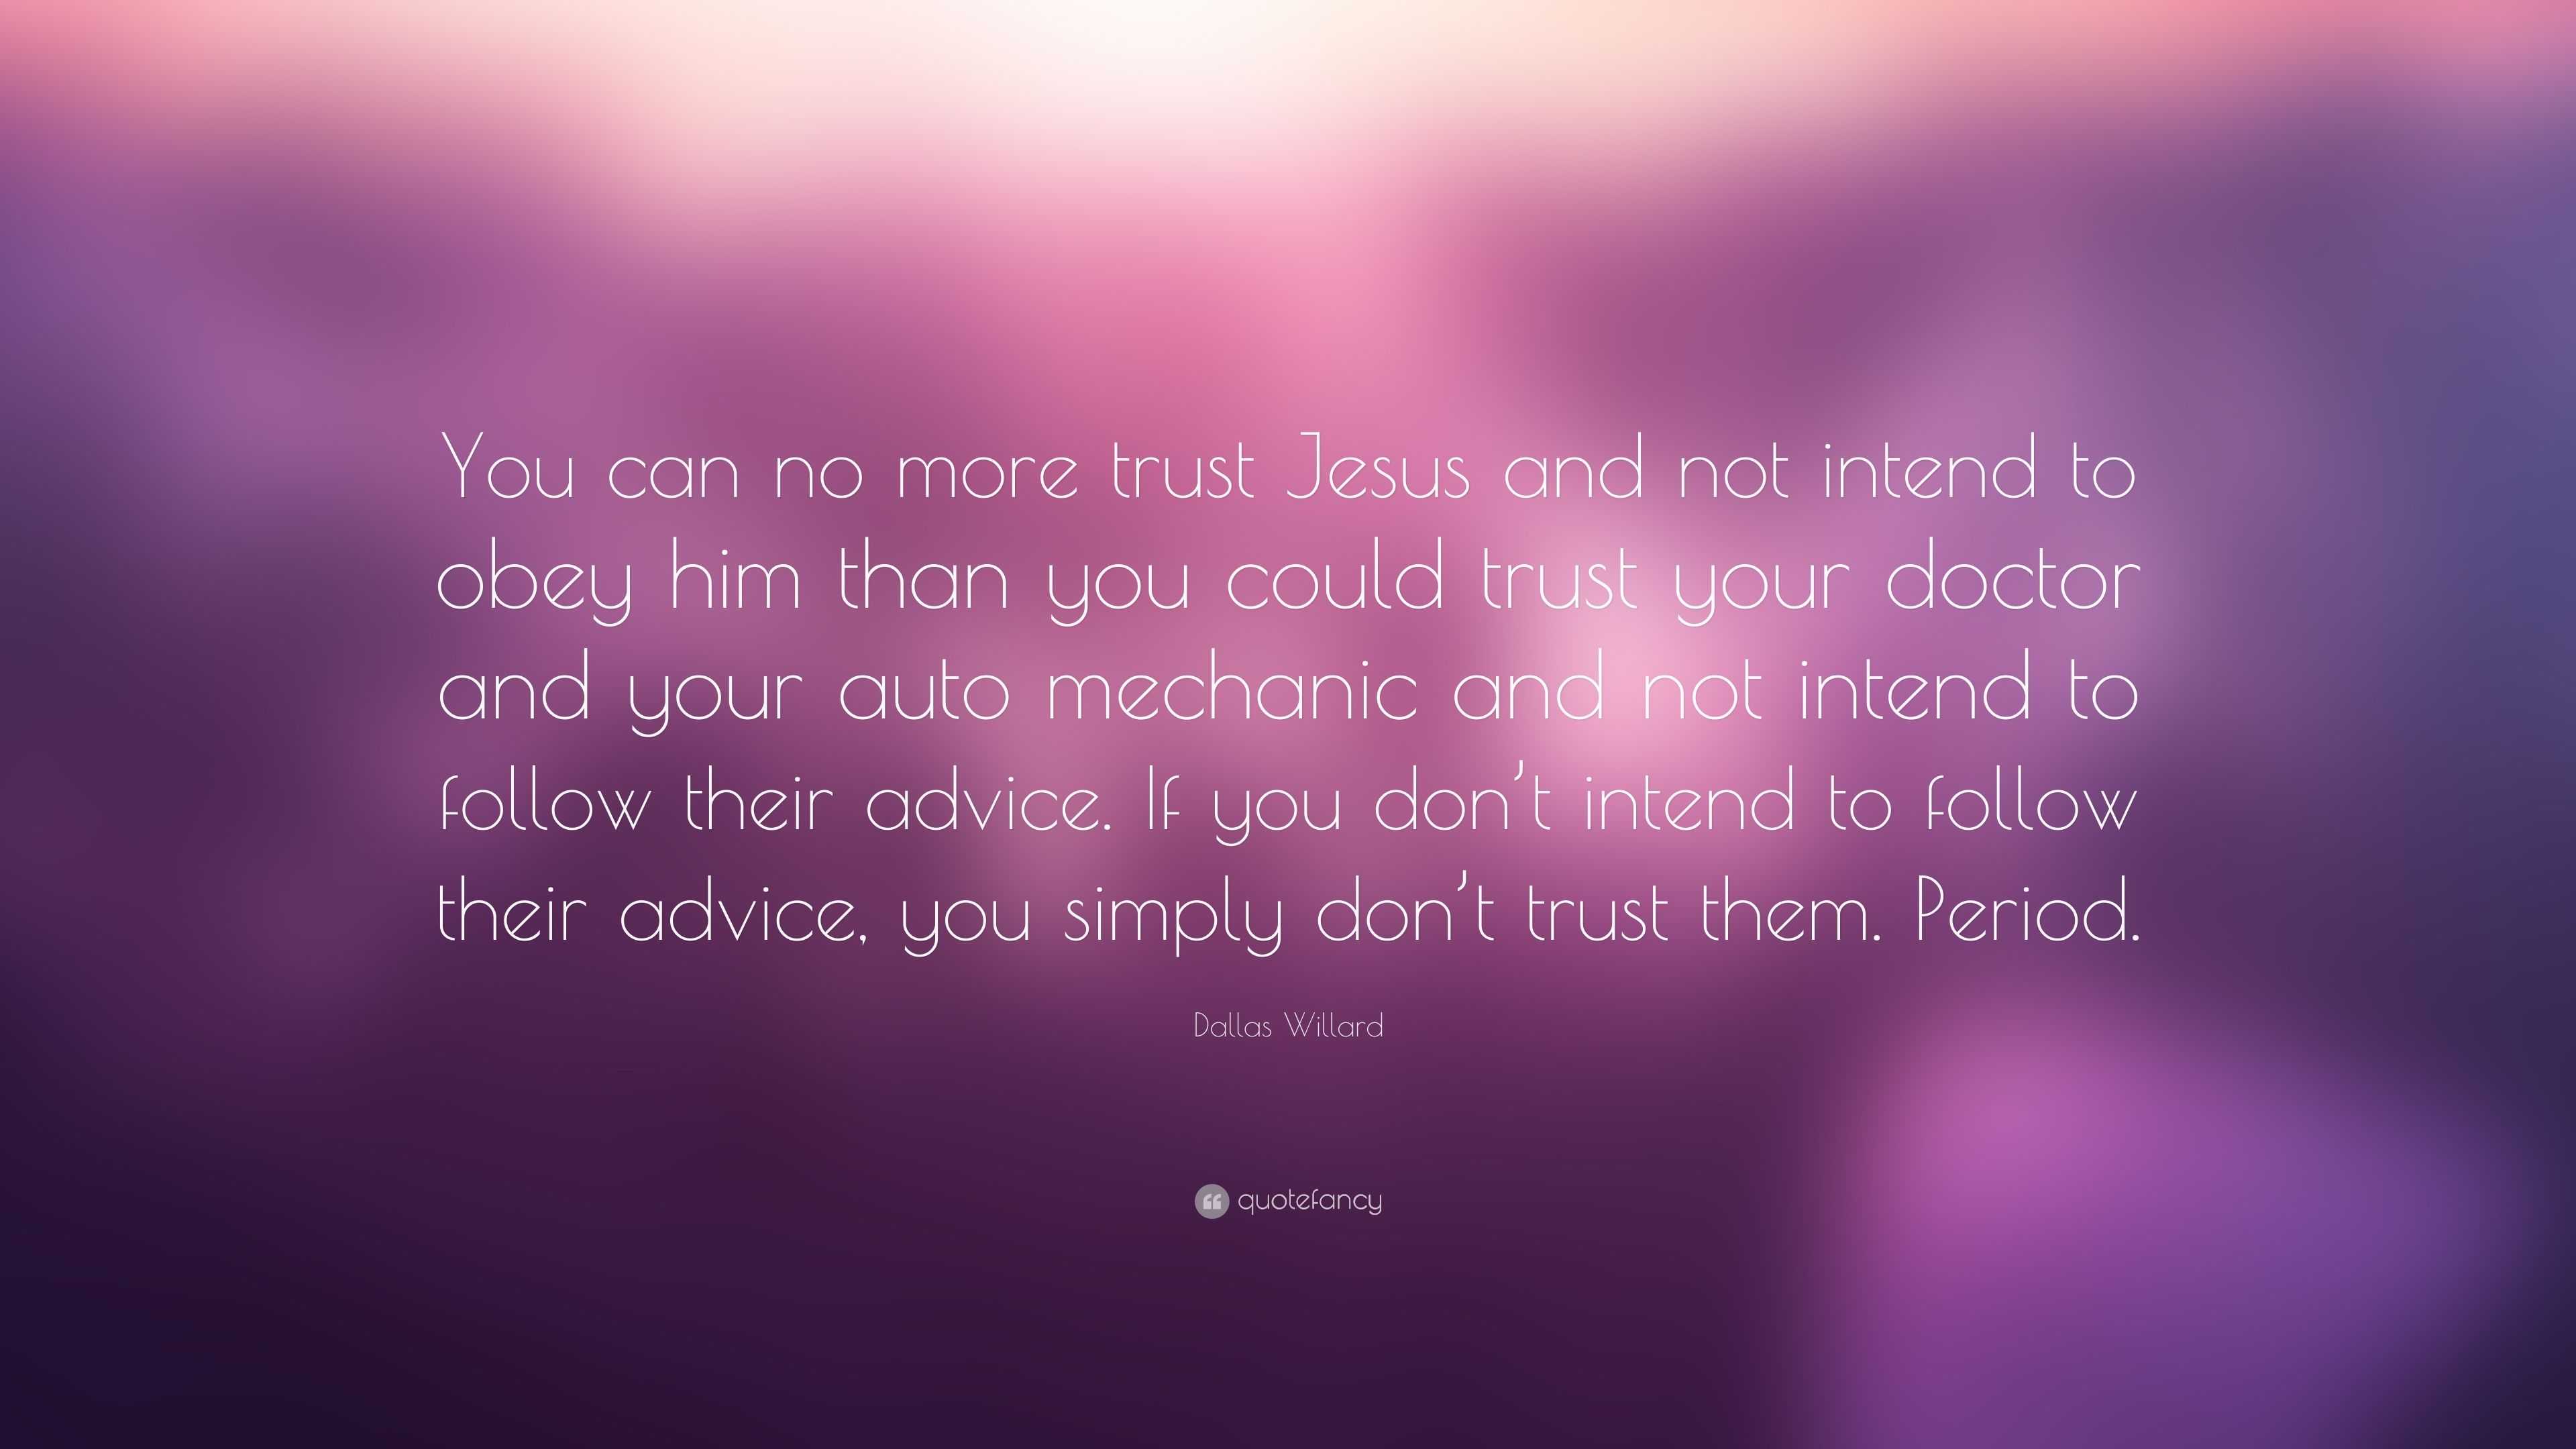 Dallas Willard Quote: “You can no more trust Jesus and not intend to ...